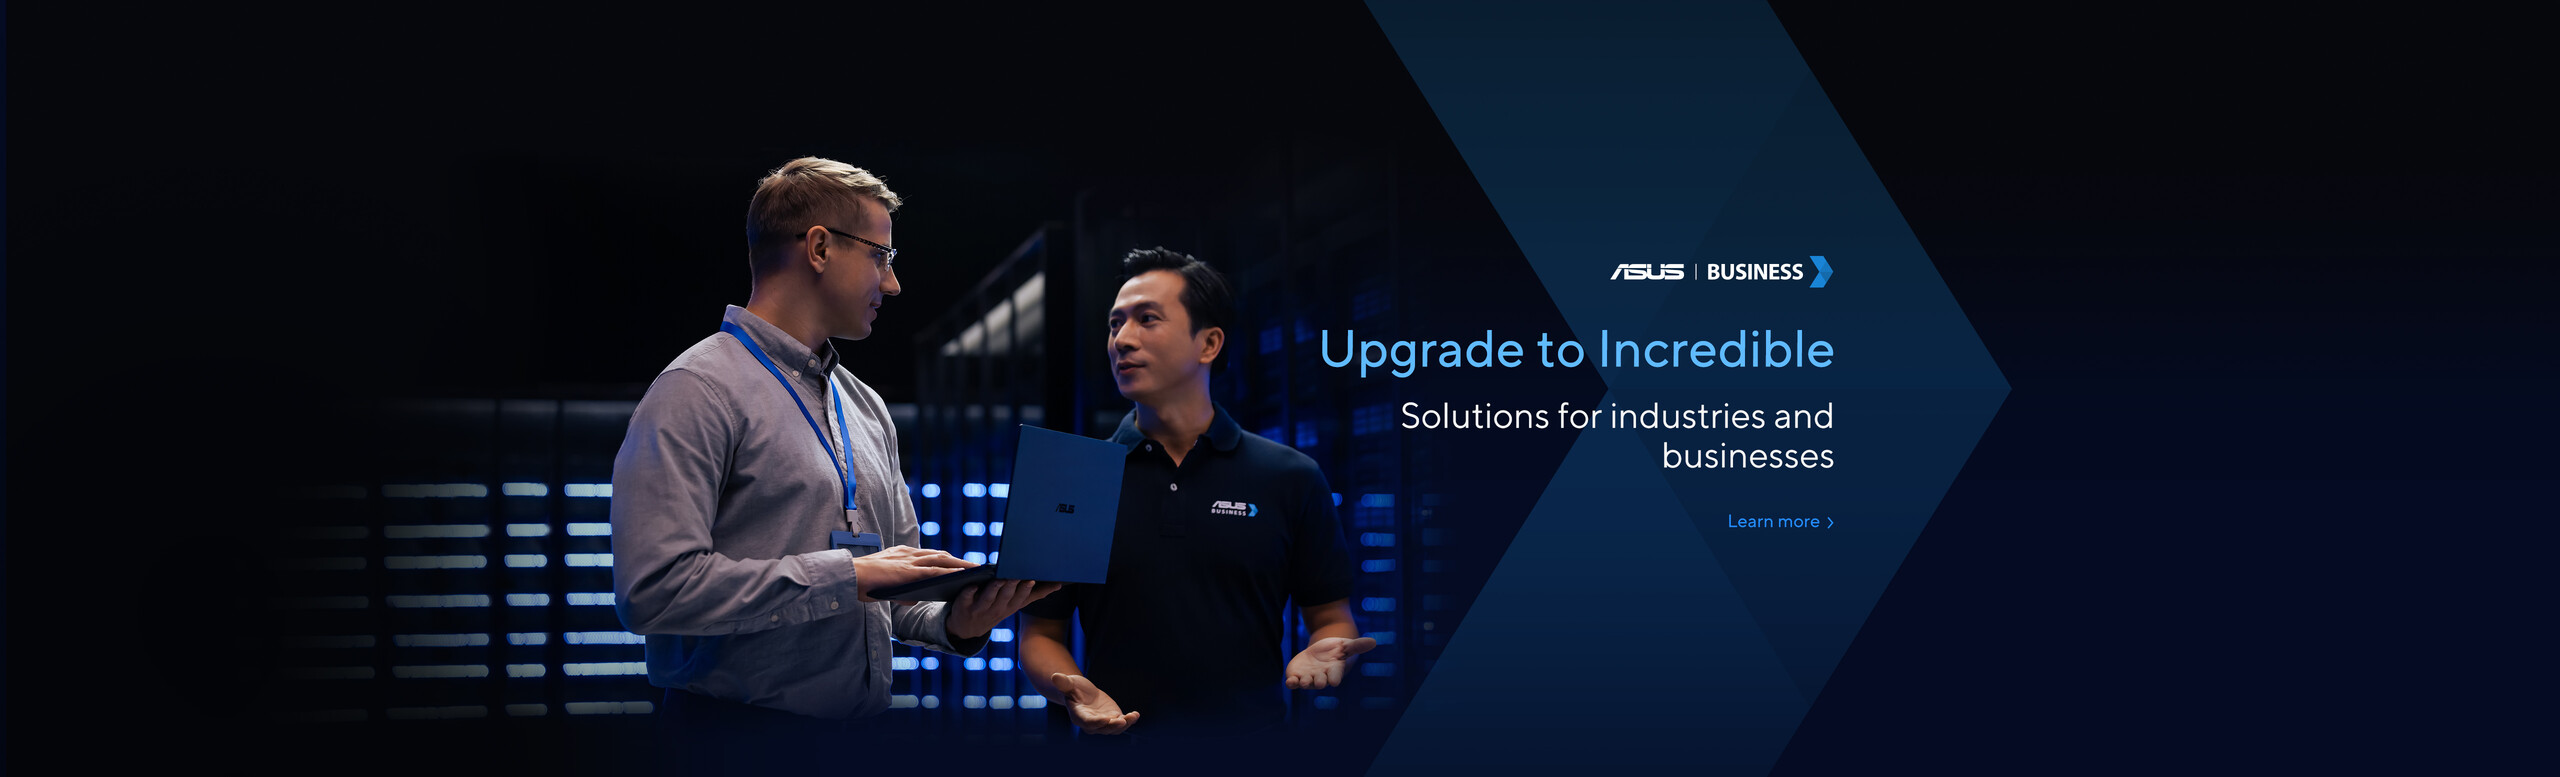 ASUS Business home page banner